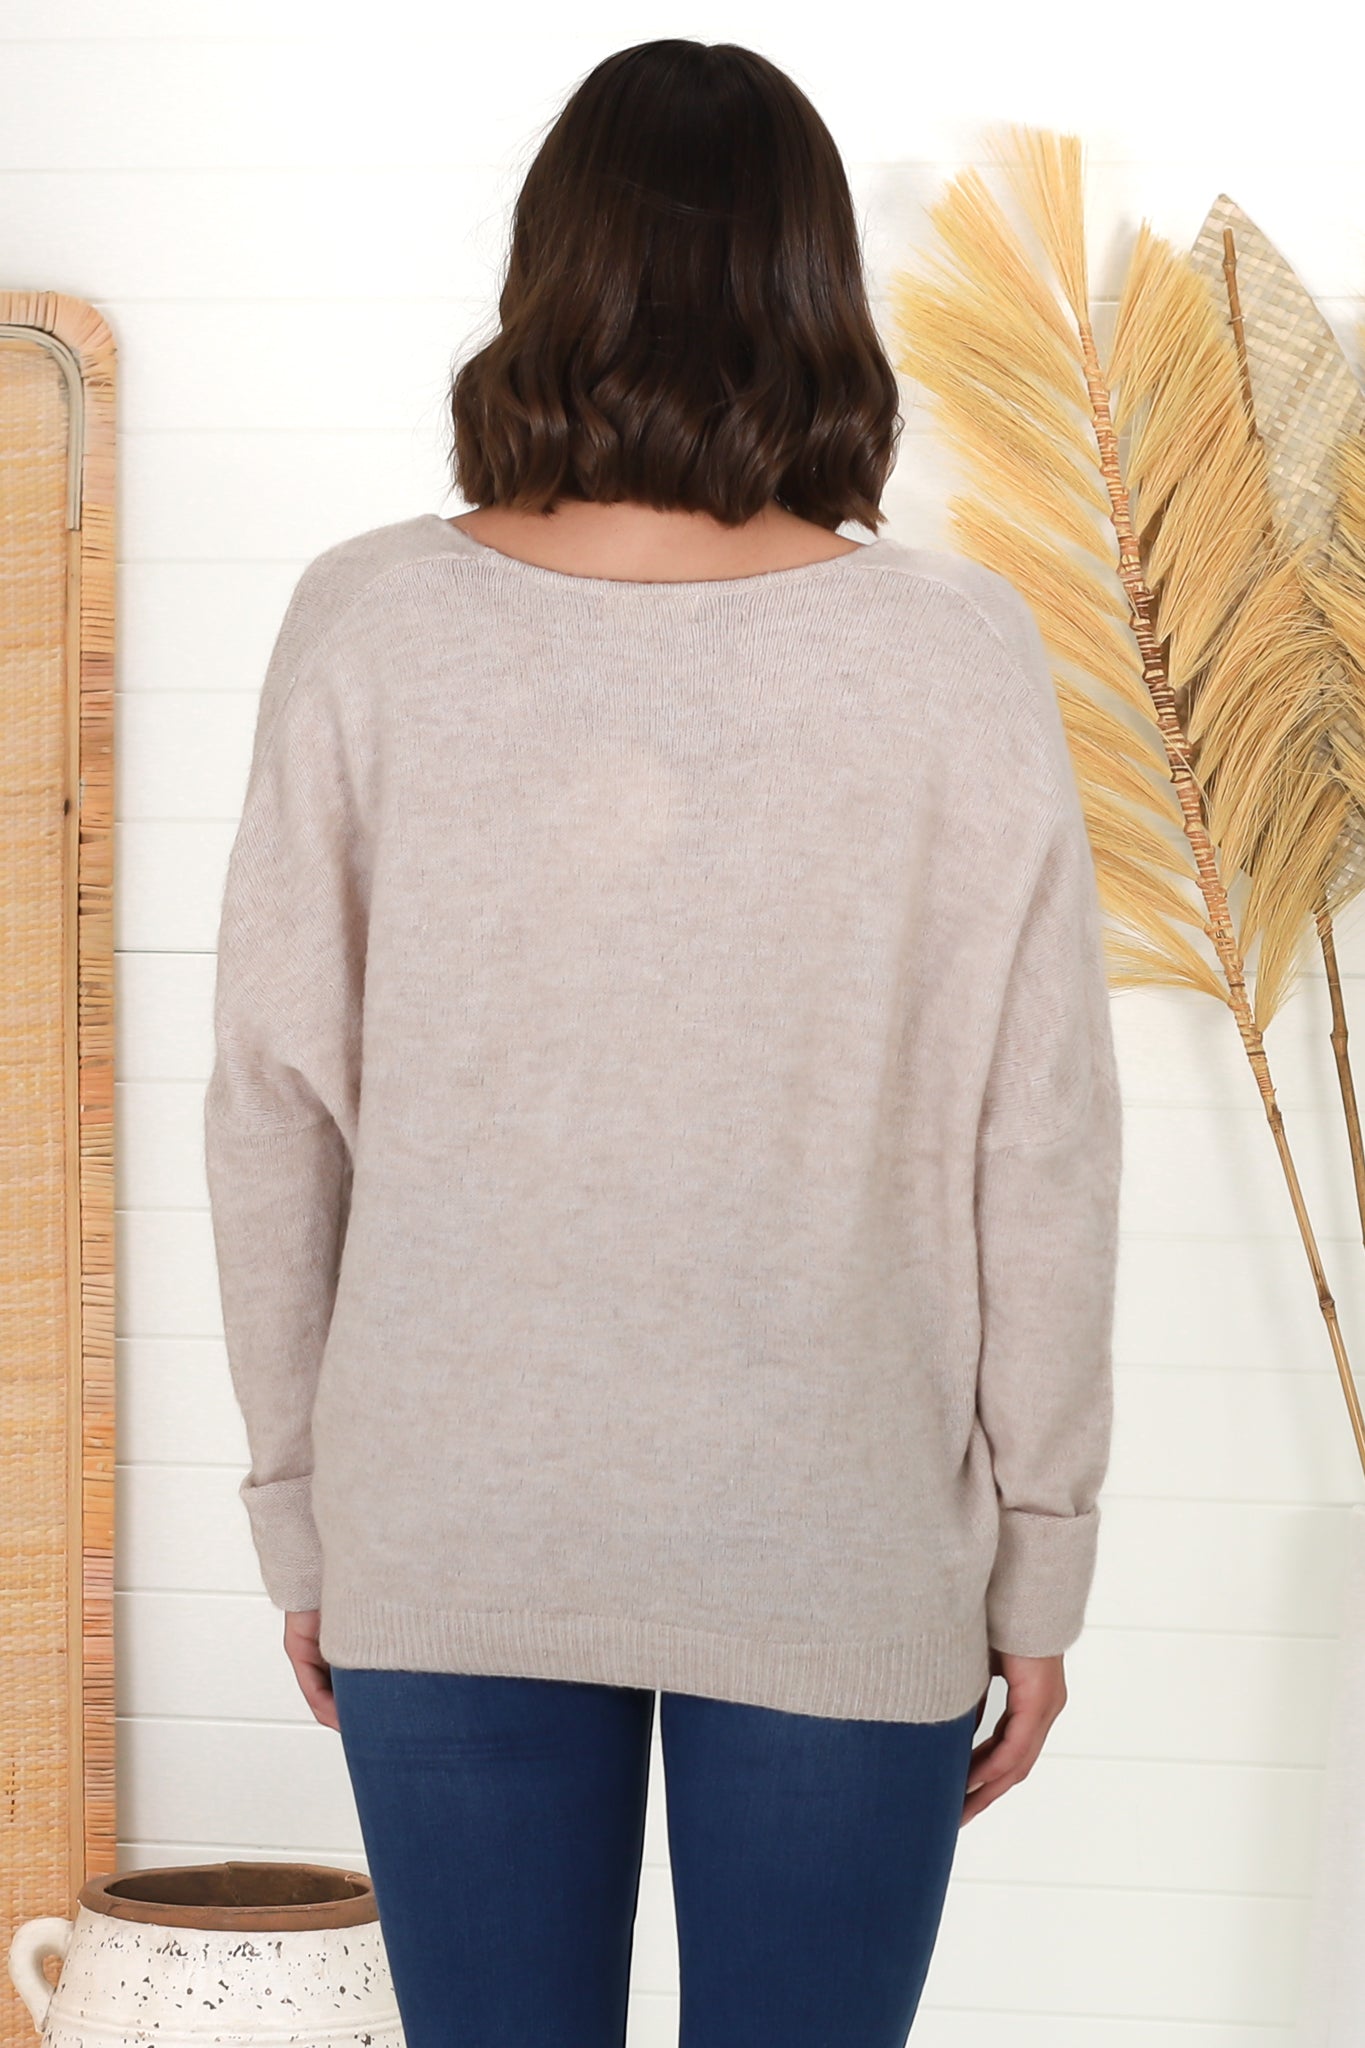 Carol Knit Top - Soft V Neck Batwing Sleeve Knit Top in Oatmeal